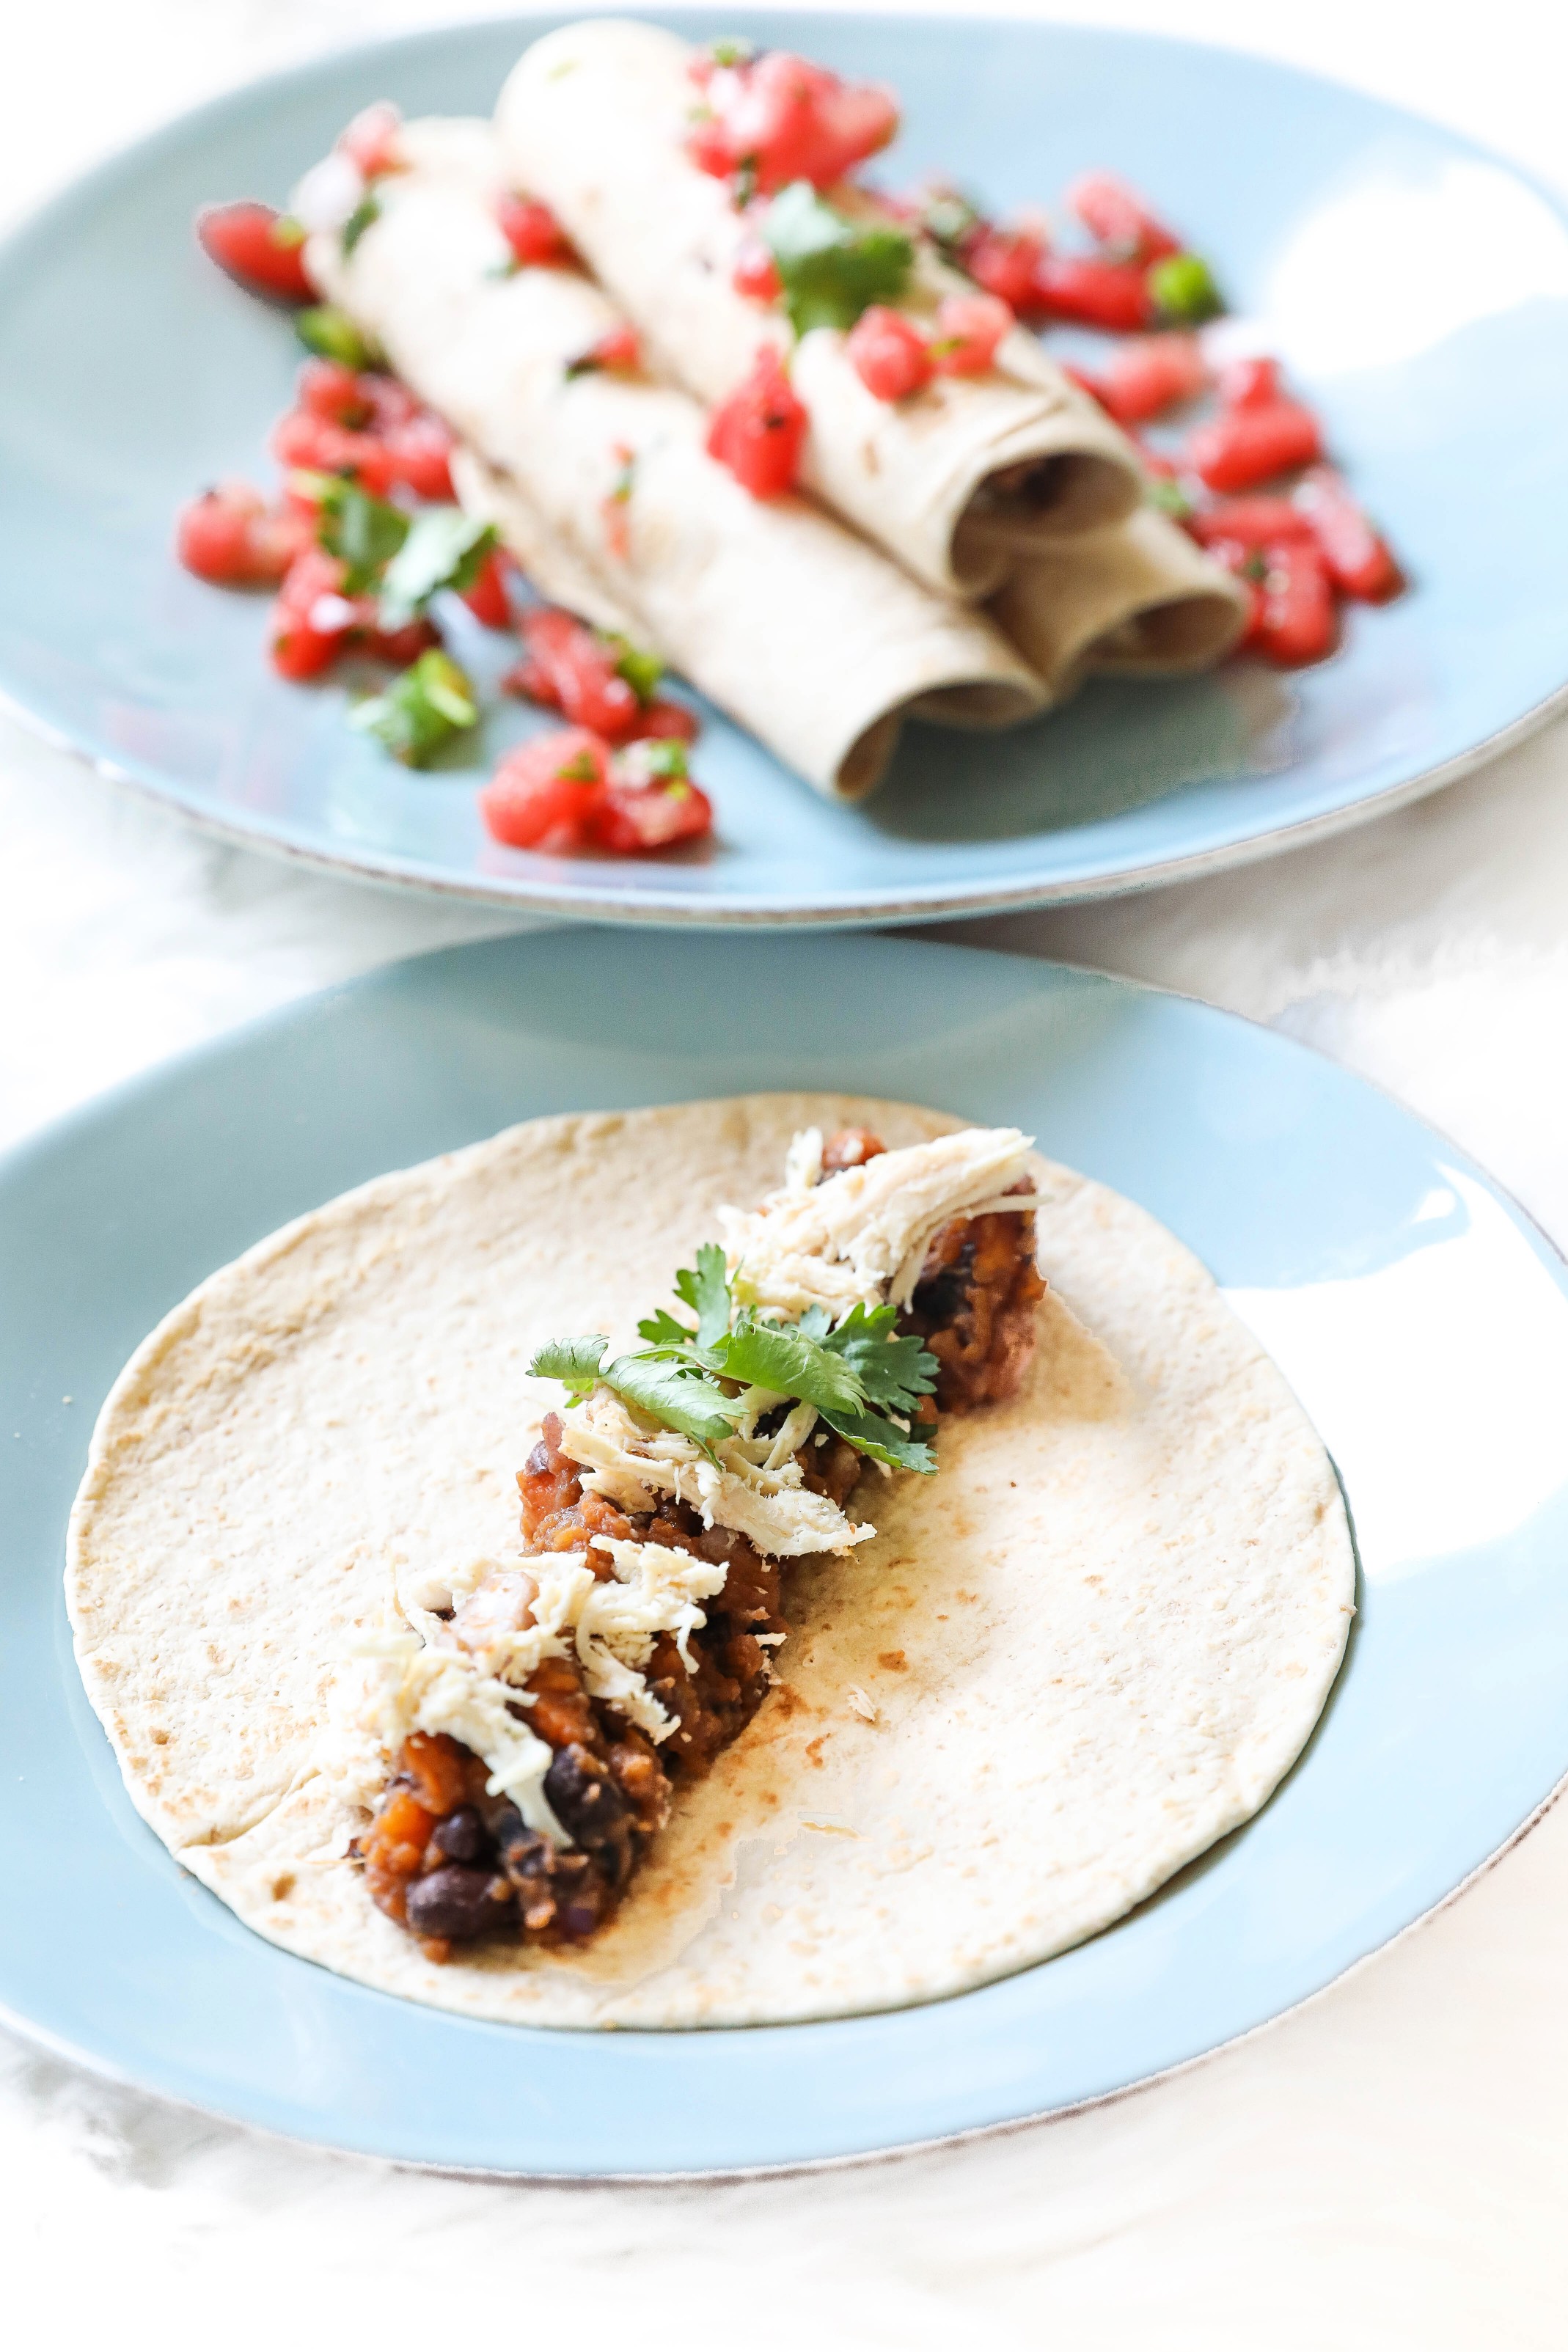 Sweet potato and black bean chicken taquito recipe! Dinner recipe ideas! Low calorie and dairy free what I eat in a day roundup! Details on lifestyle blog daily dose of charm by lauren lindmark